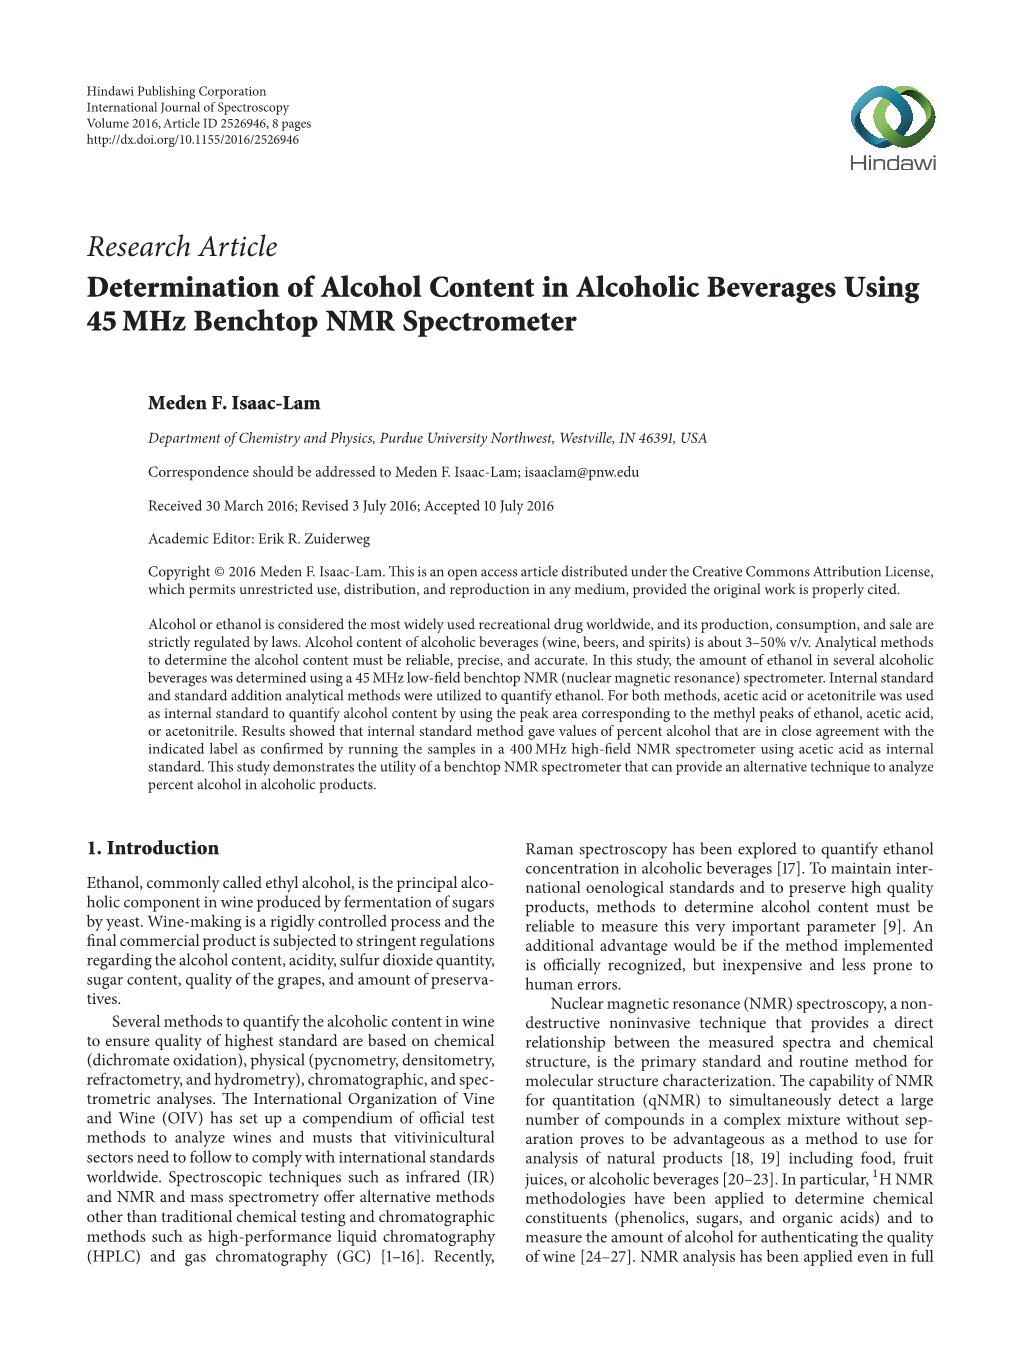 Research Article Determination of Alcohol Content in Alcoholic Beverages Using 45 Mhz Benchtop NMR Spectrometer